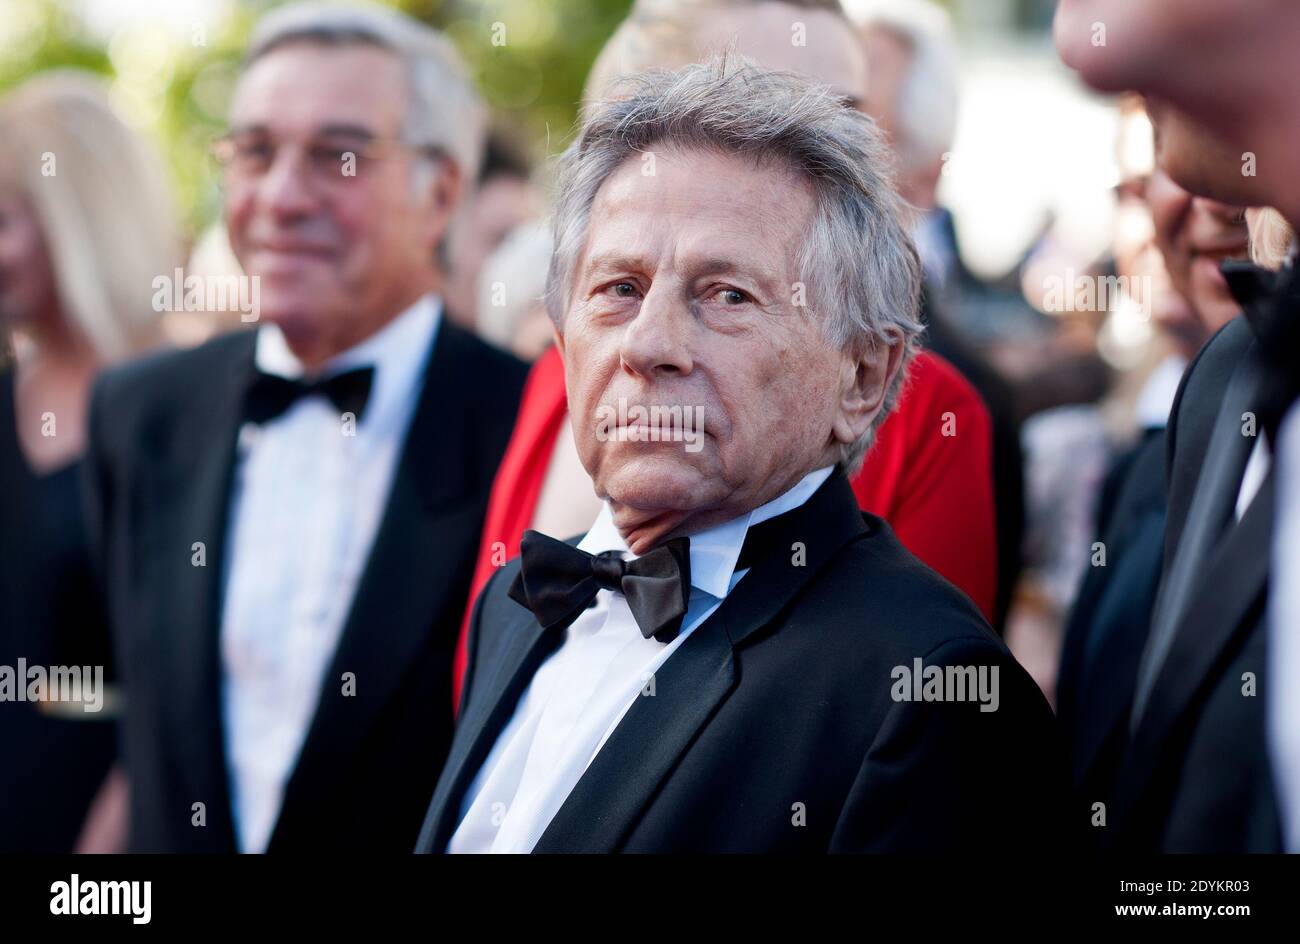 Roman Polanski arriving for La Venus A La Fourrure screening held at the Palais Des Festivals in Cannes, France on May 25, 2013, as part of the 66th Cannes Film Festival. Photo by Lionel Hahn/ABACAPRESS.COM Stock Photo